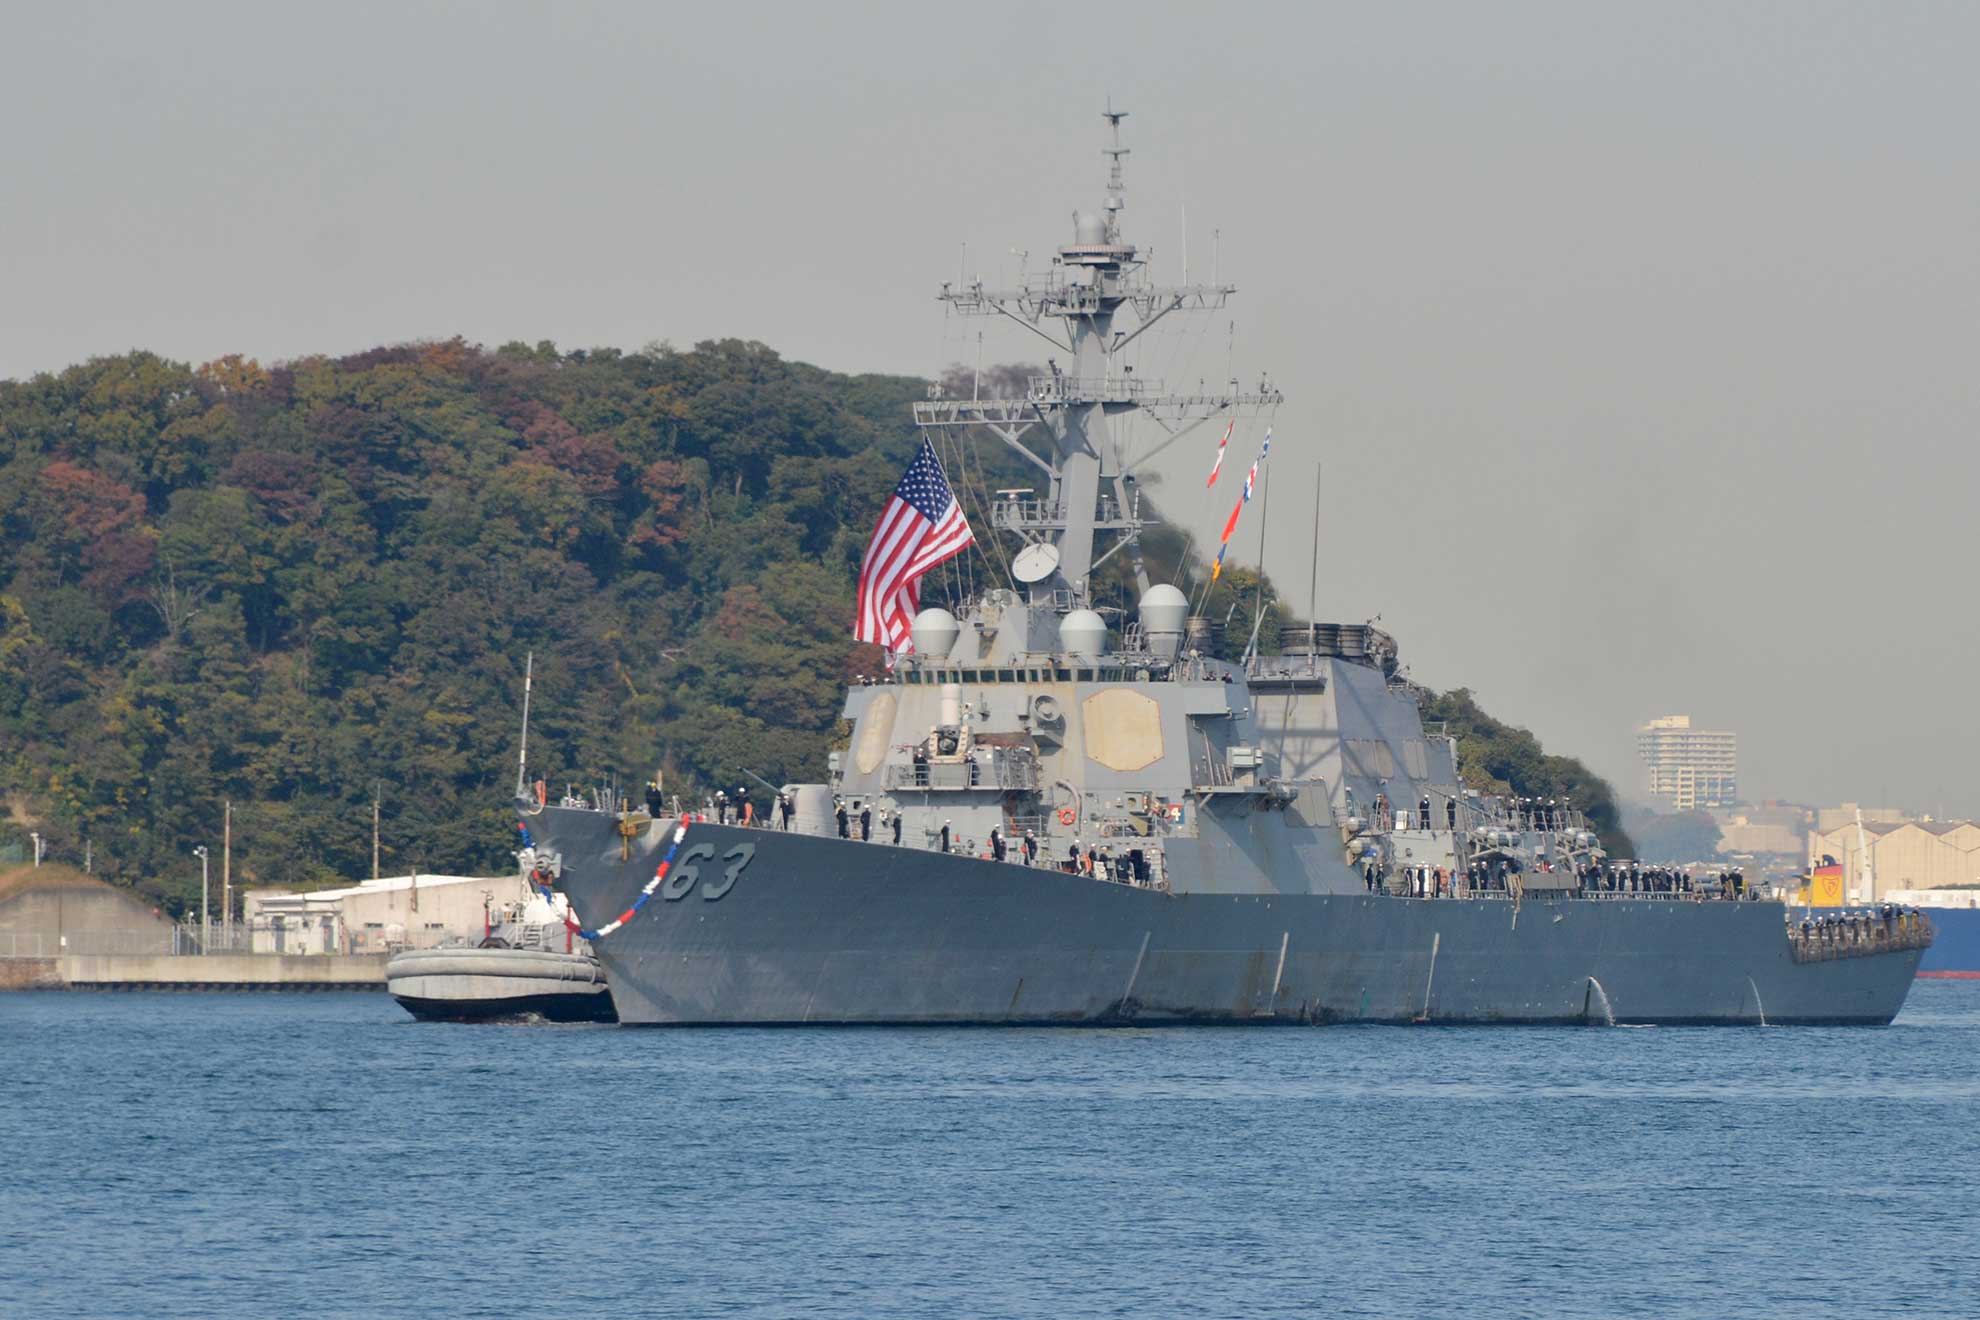 Yokosuka, Japan (Nov. 17, 2016) The Arleigh Burke-class guided-missile destroyer USS Stethem (DDG 63) returns to Fleet Activities (FLEACT) Yokosuka following its 2016 patrol. Stethem made a brief stop at FLEACT Sasebo to pick up family members for a Tiger Cruise. FLEACT Yokosuka provides, maintains, and operates base facilities and services in support of 7th Fleet's forward-deployed naval forces, 83 tenant commands, and 24,000 military and civilian personnel -- U.S. Navy photo by Petty Officer 1st Class Peter Burghart. -